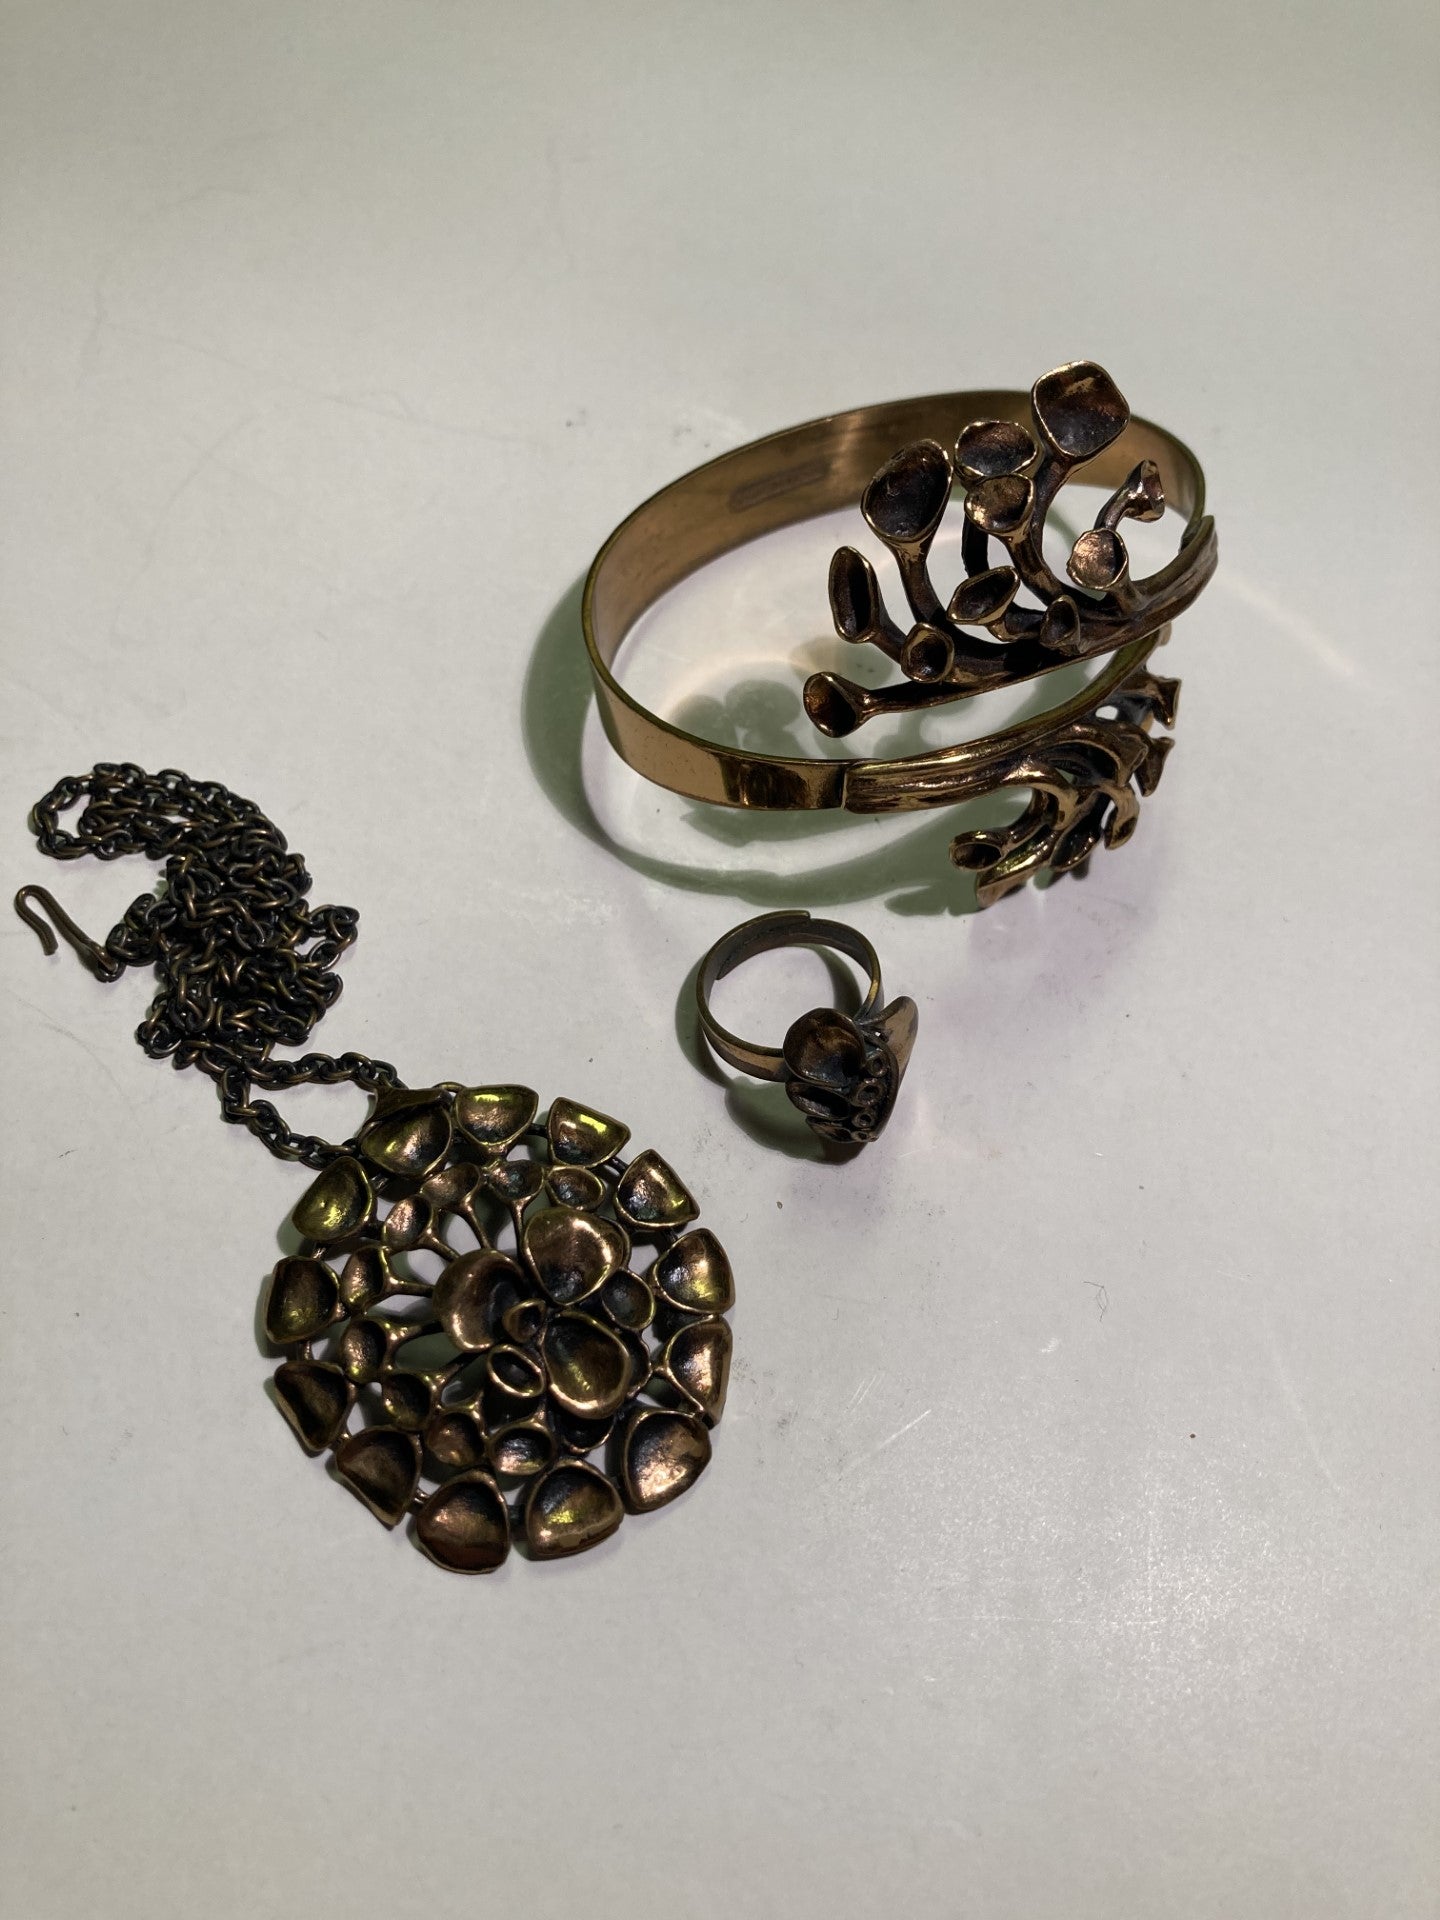 Beautiful vintage jewelery from Finland - no. 01109